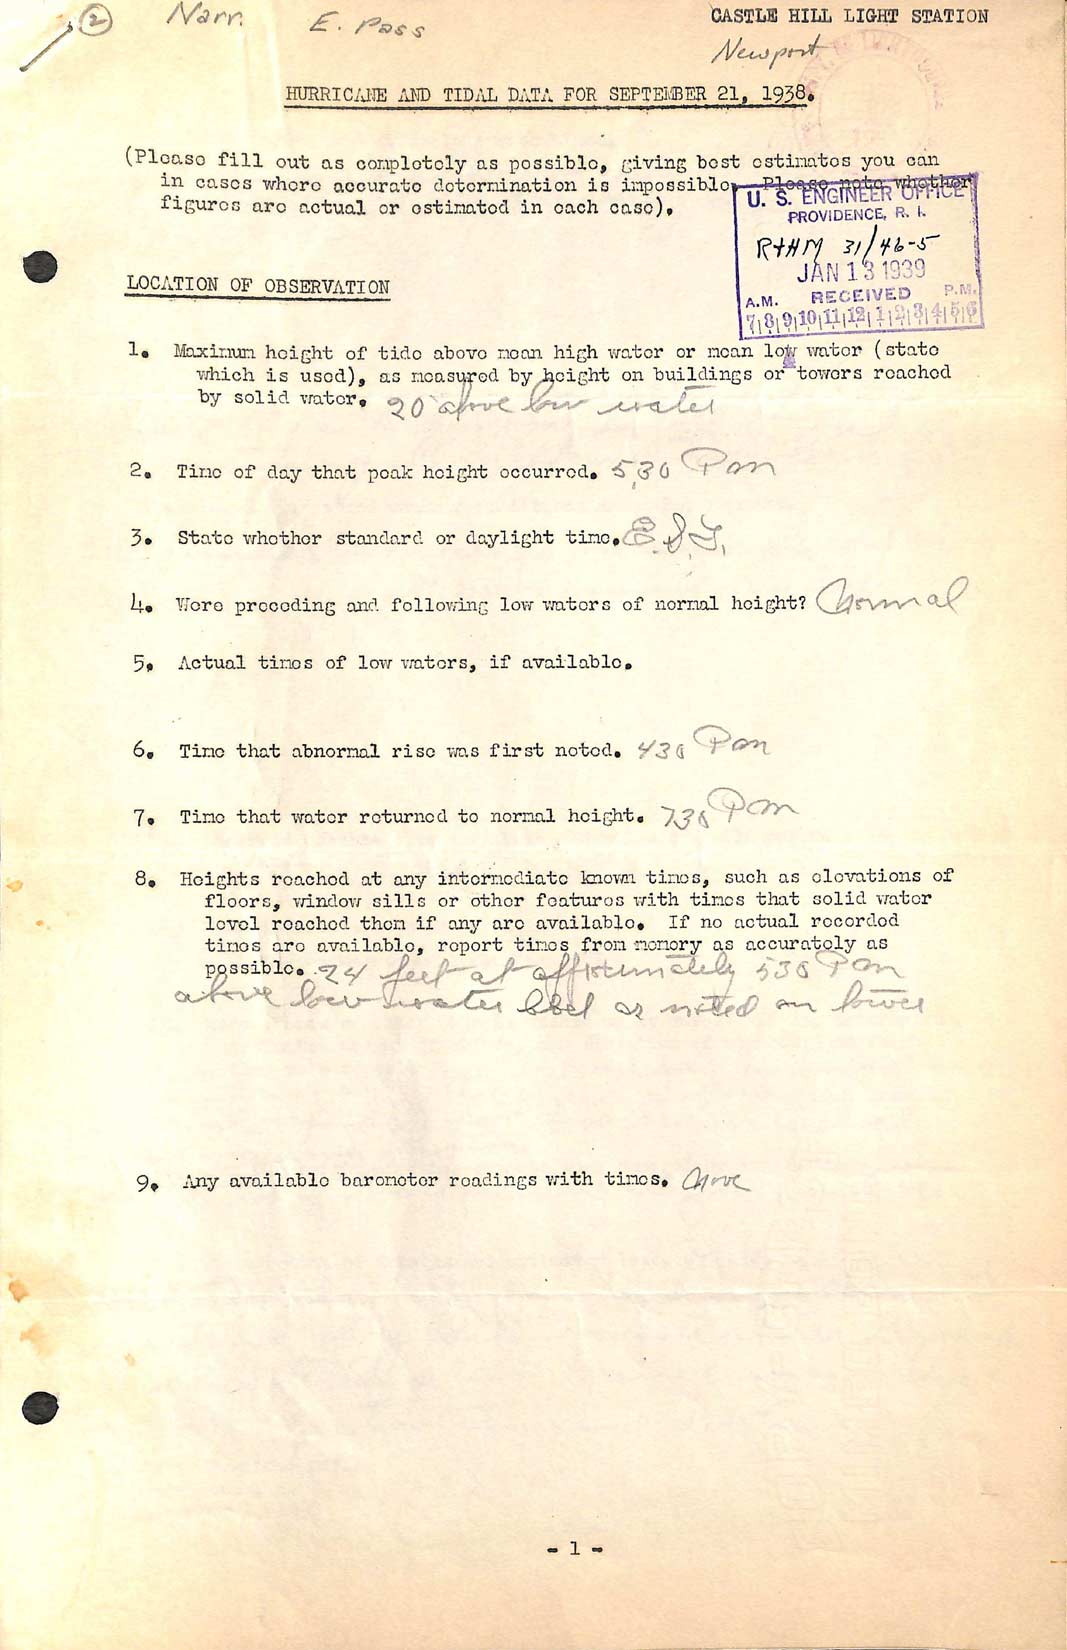 A questionnaire regarding the Effects of hurricane of September 21, 1938